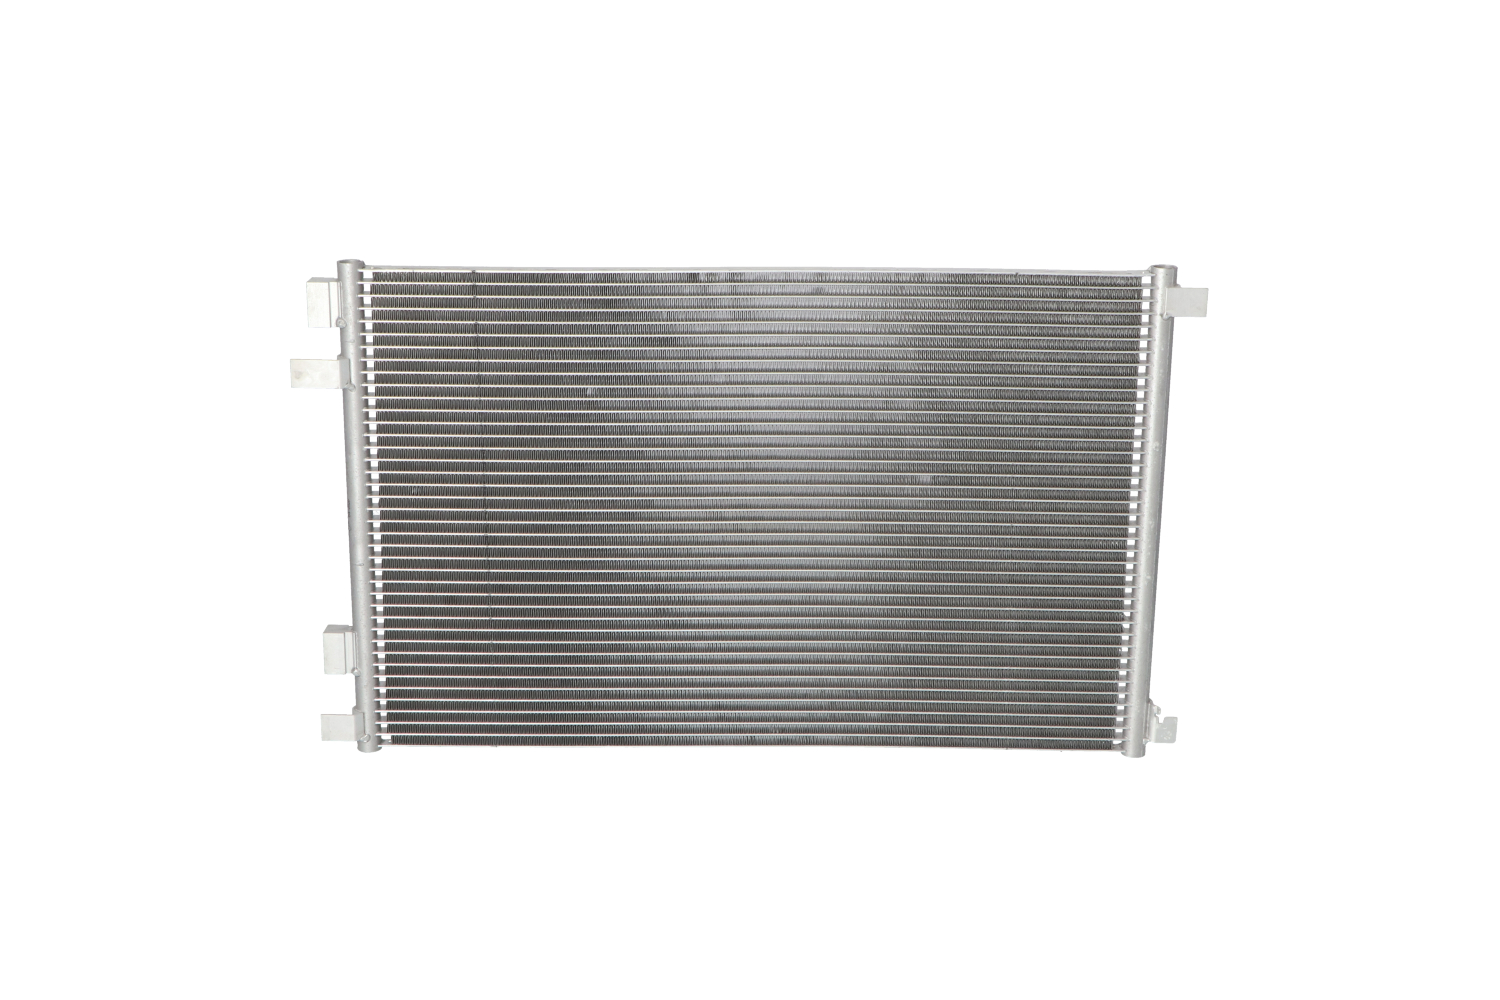 Renault Air conditioning condenser NRF 35449 at a good price